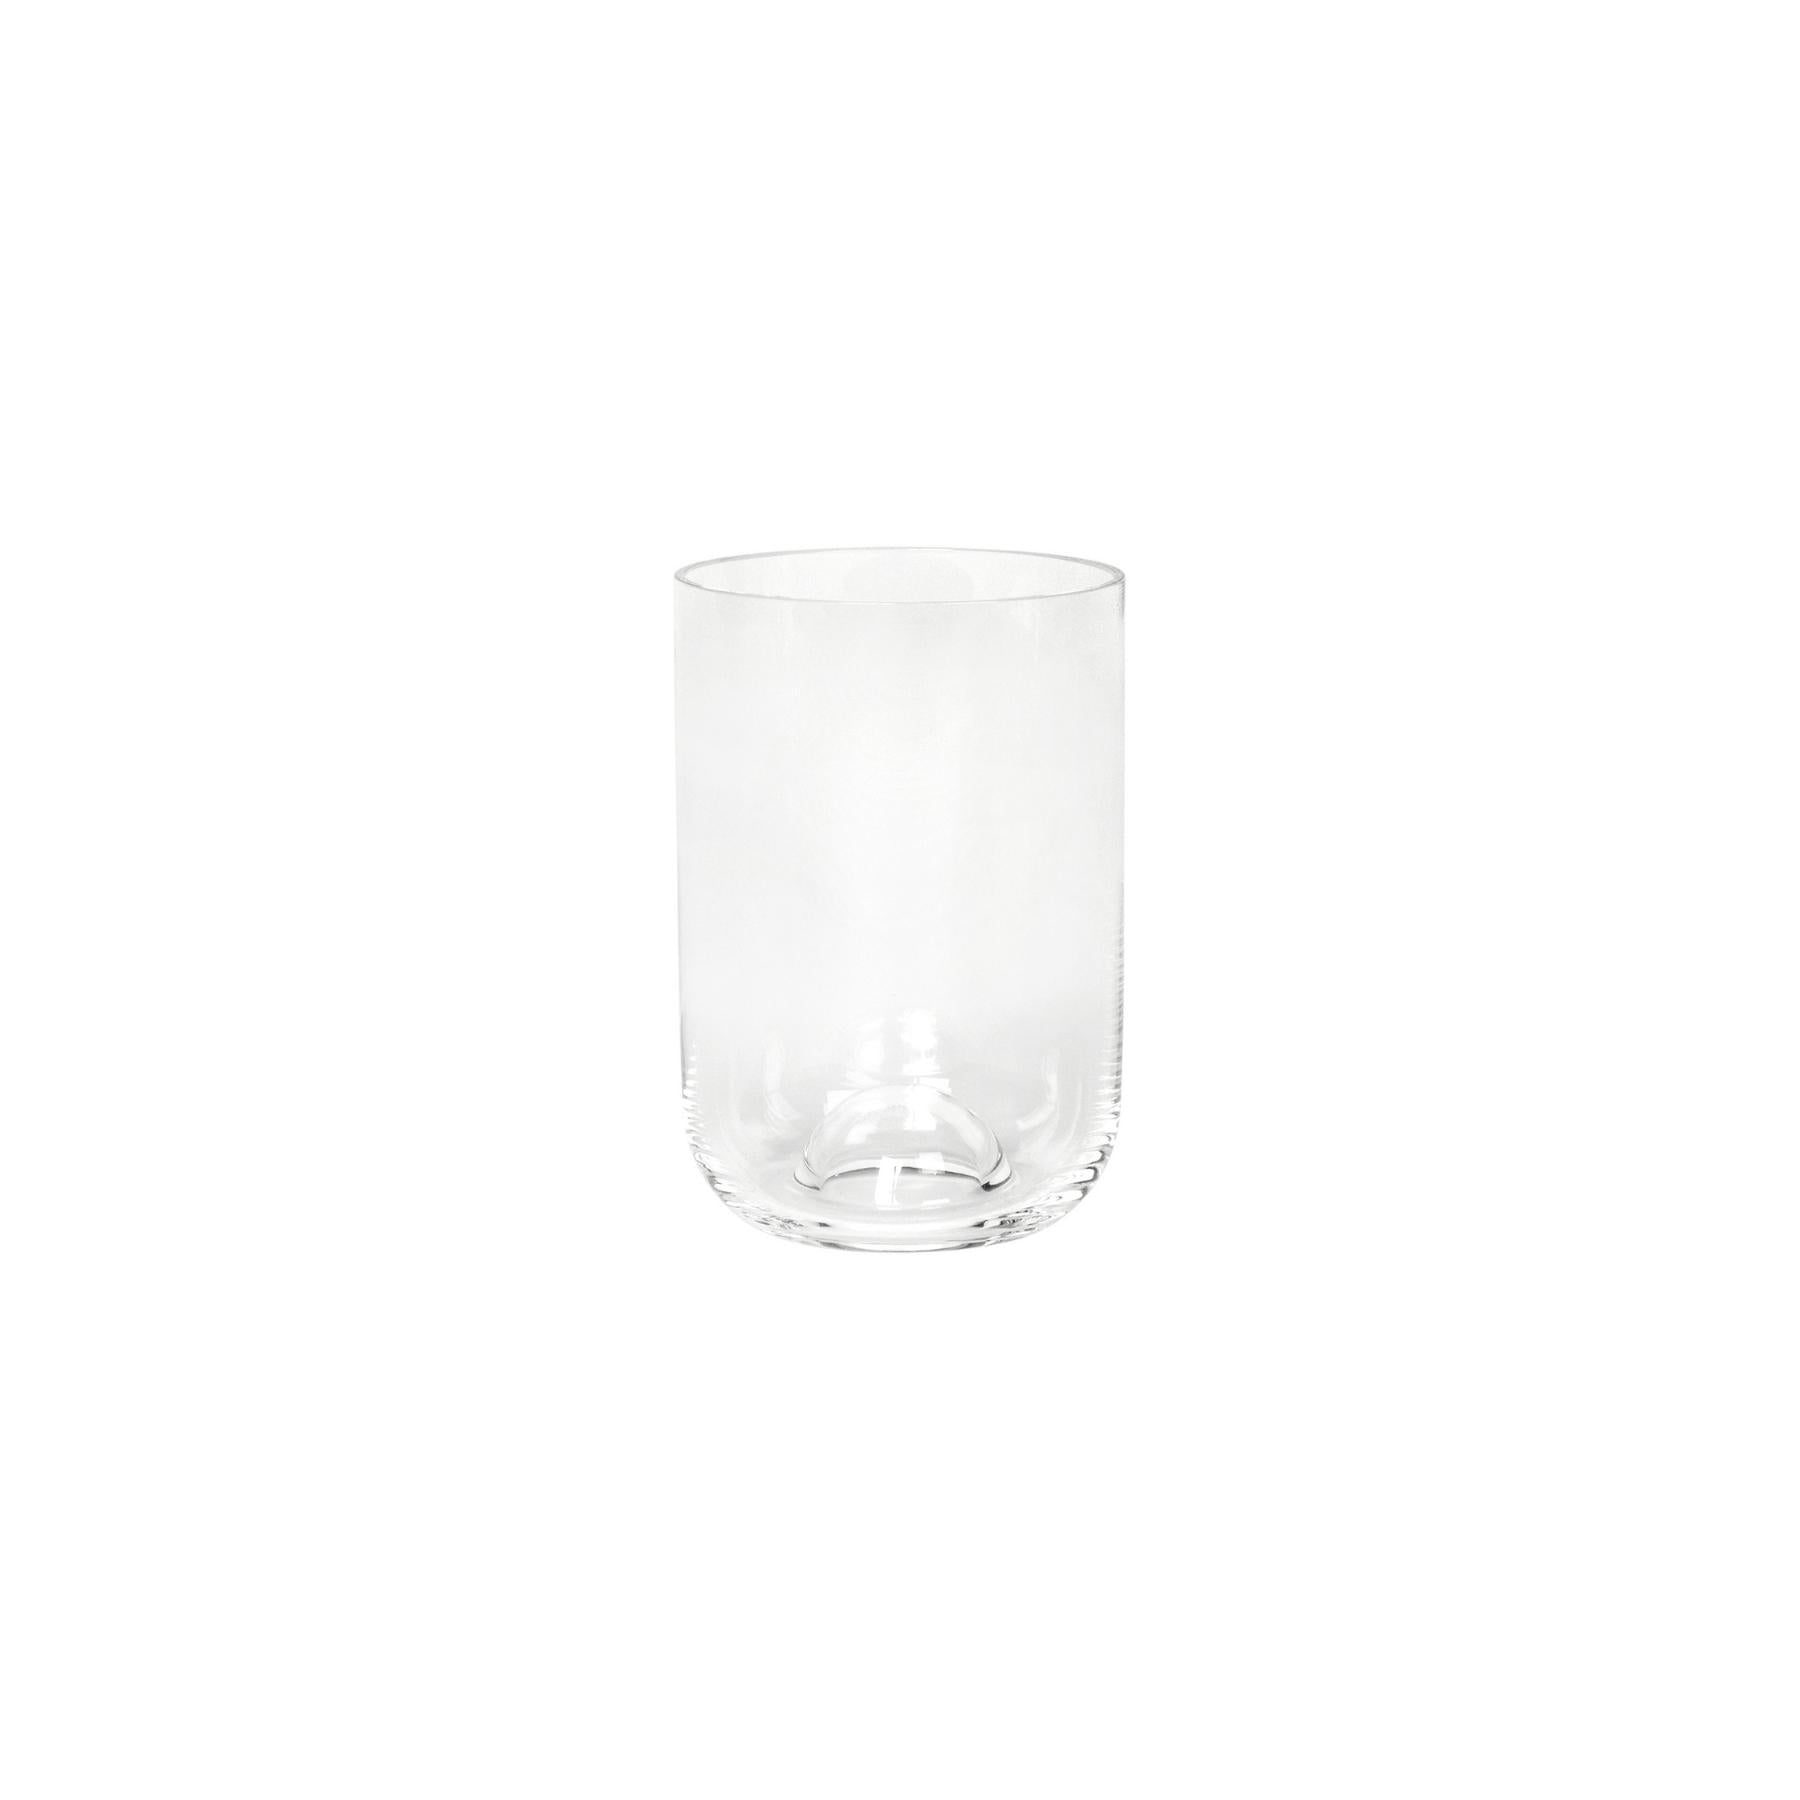 Capsule Drinking Glass - Large - Set of 4